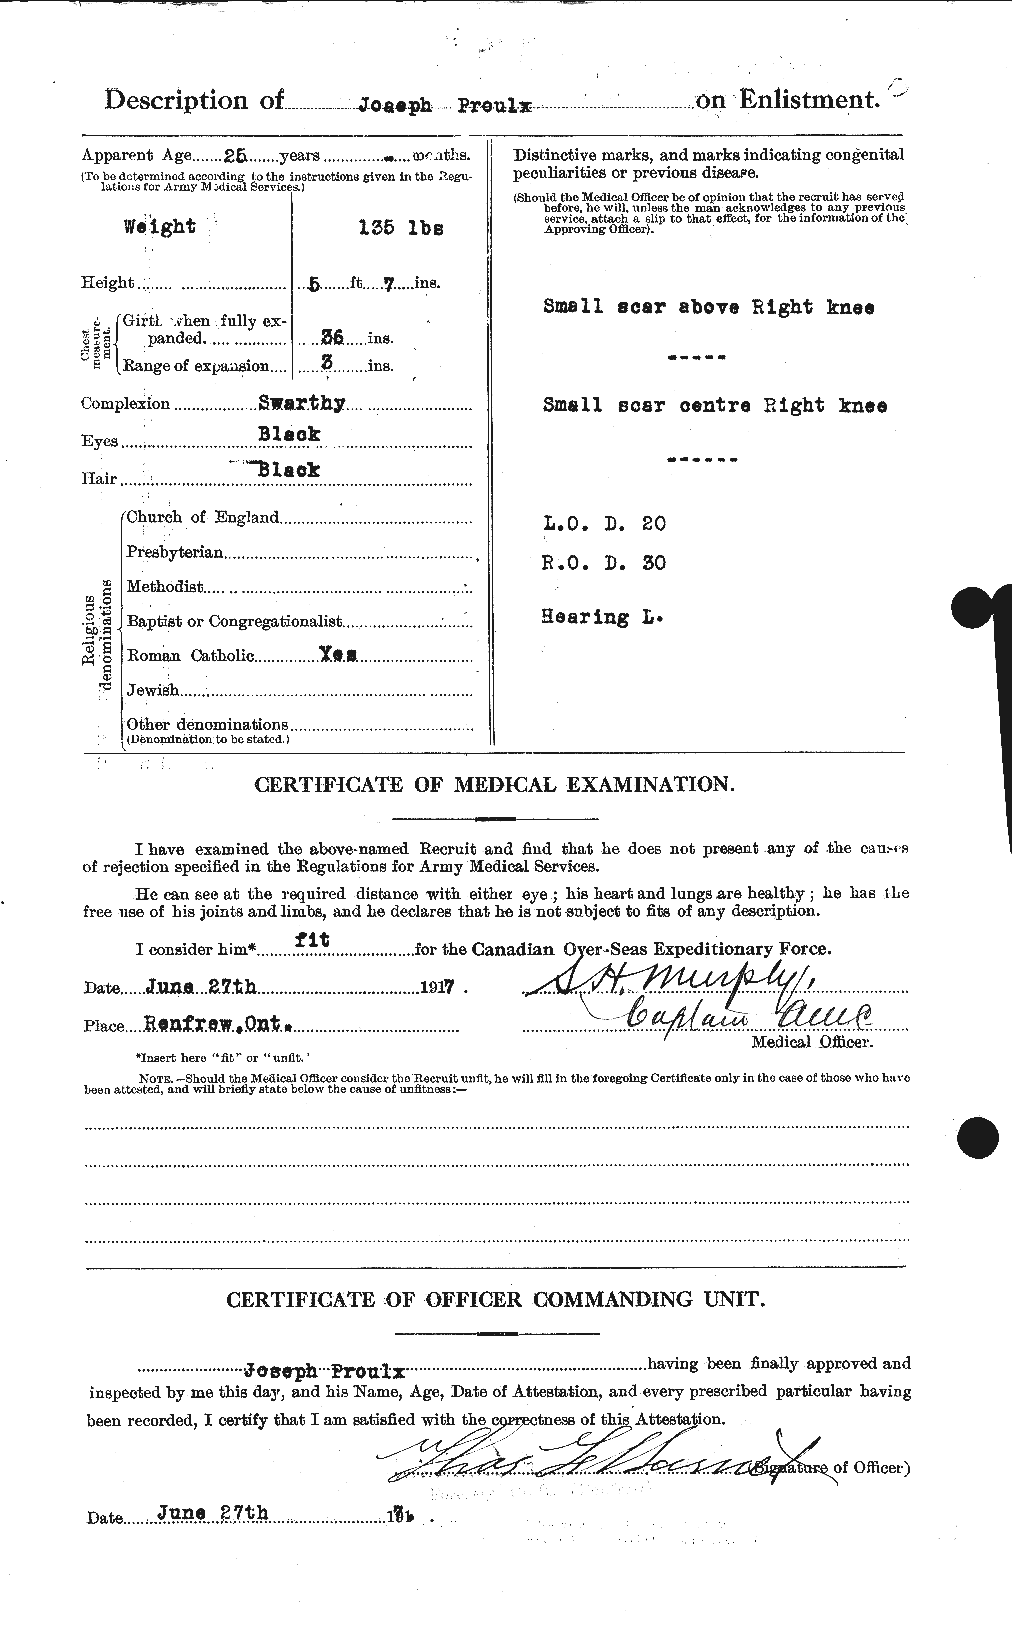 Personnel Records of the First World War - CEF 591601b